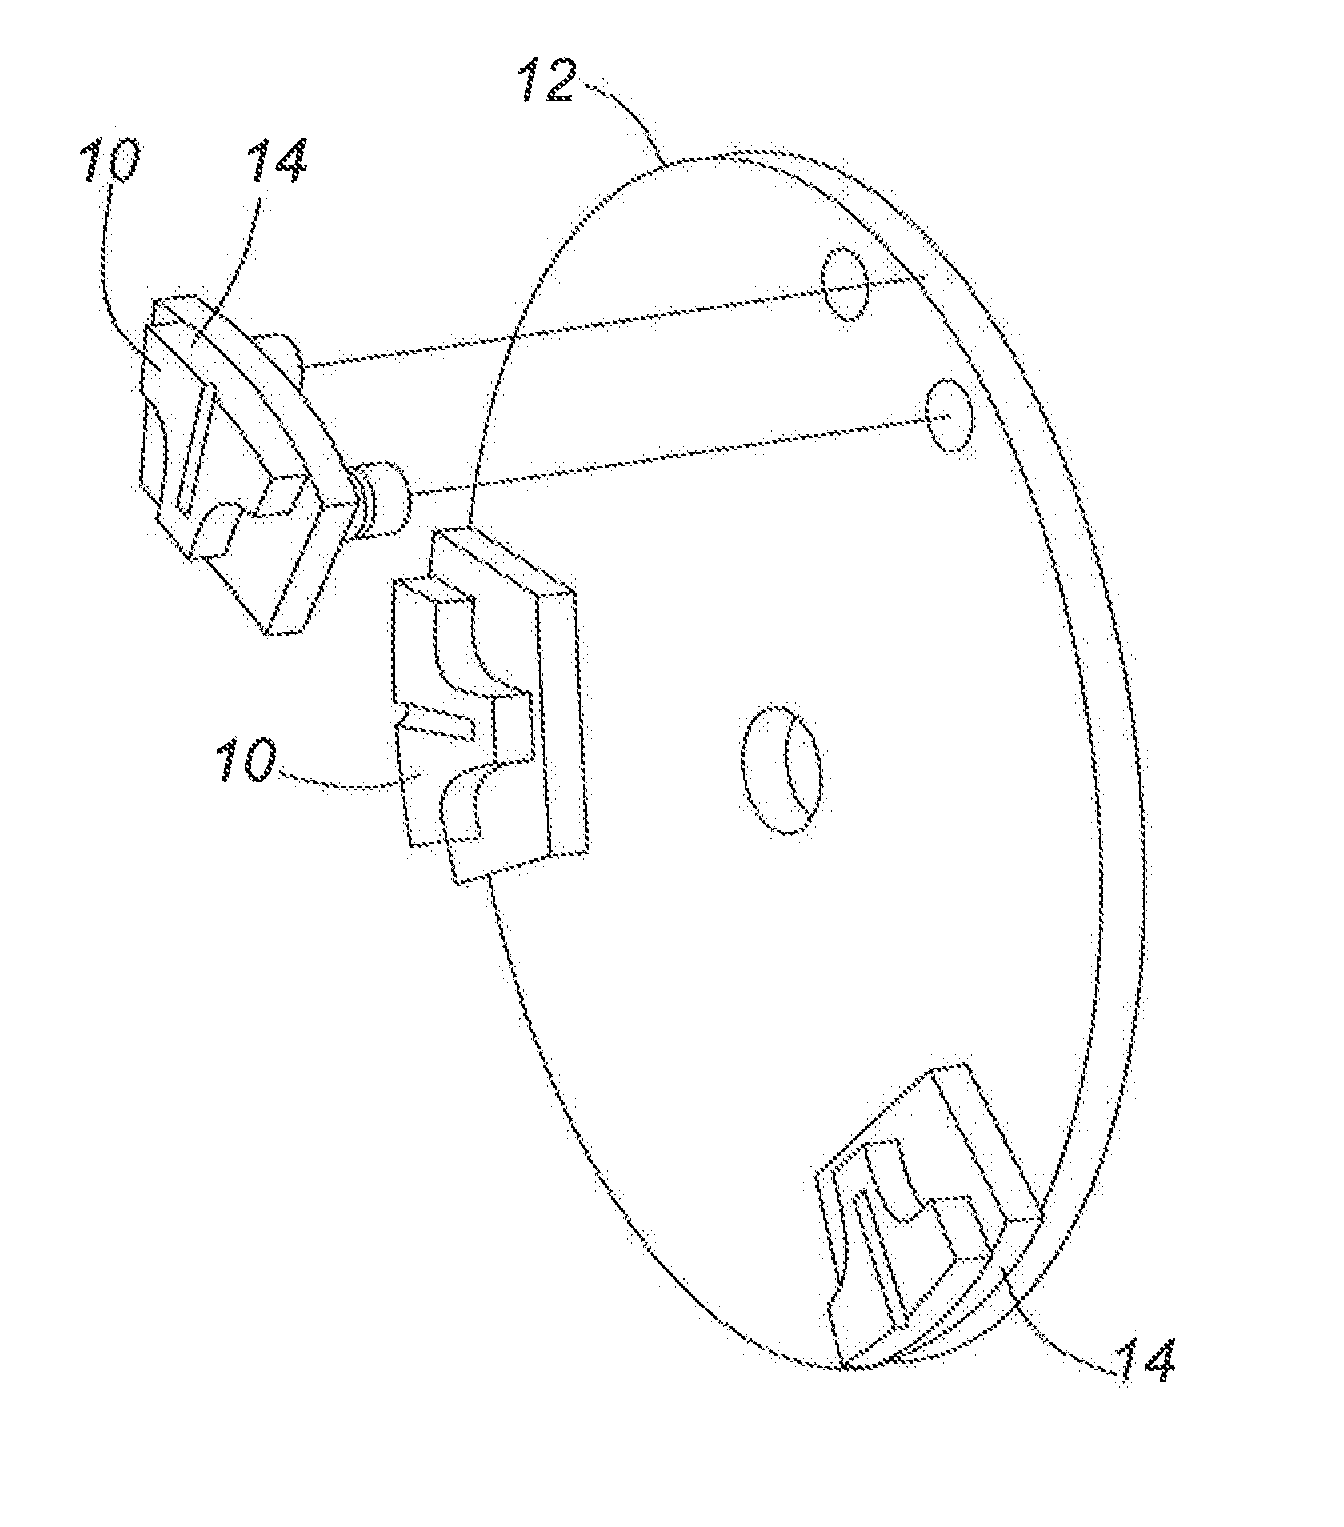 System for Mounting an Abrasive Tool to a Drive Plate of Grinding and Polishing Machines